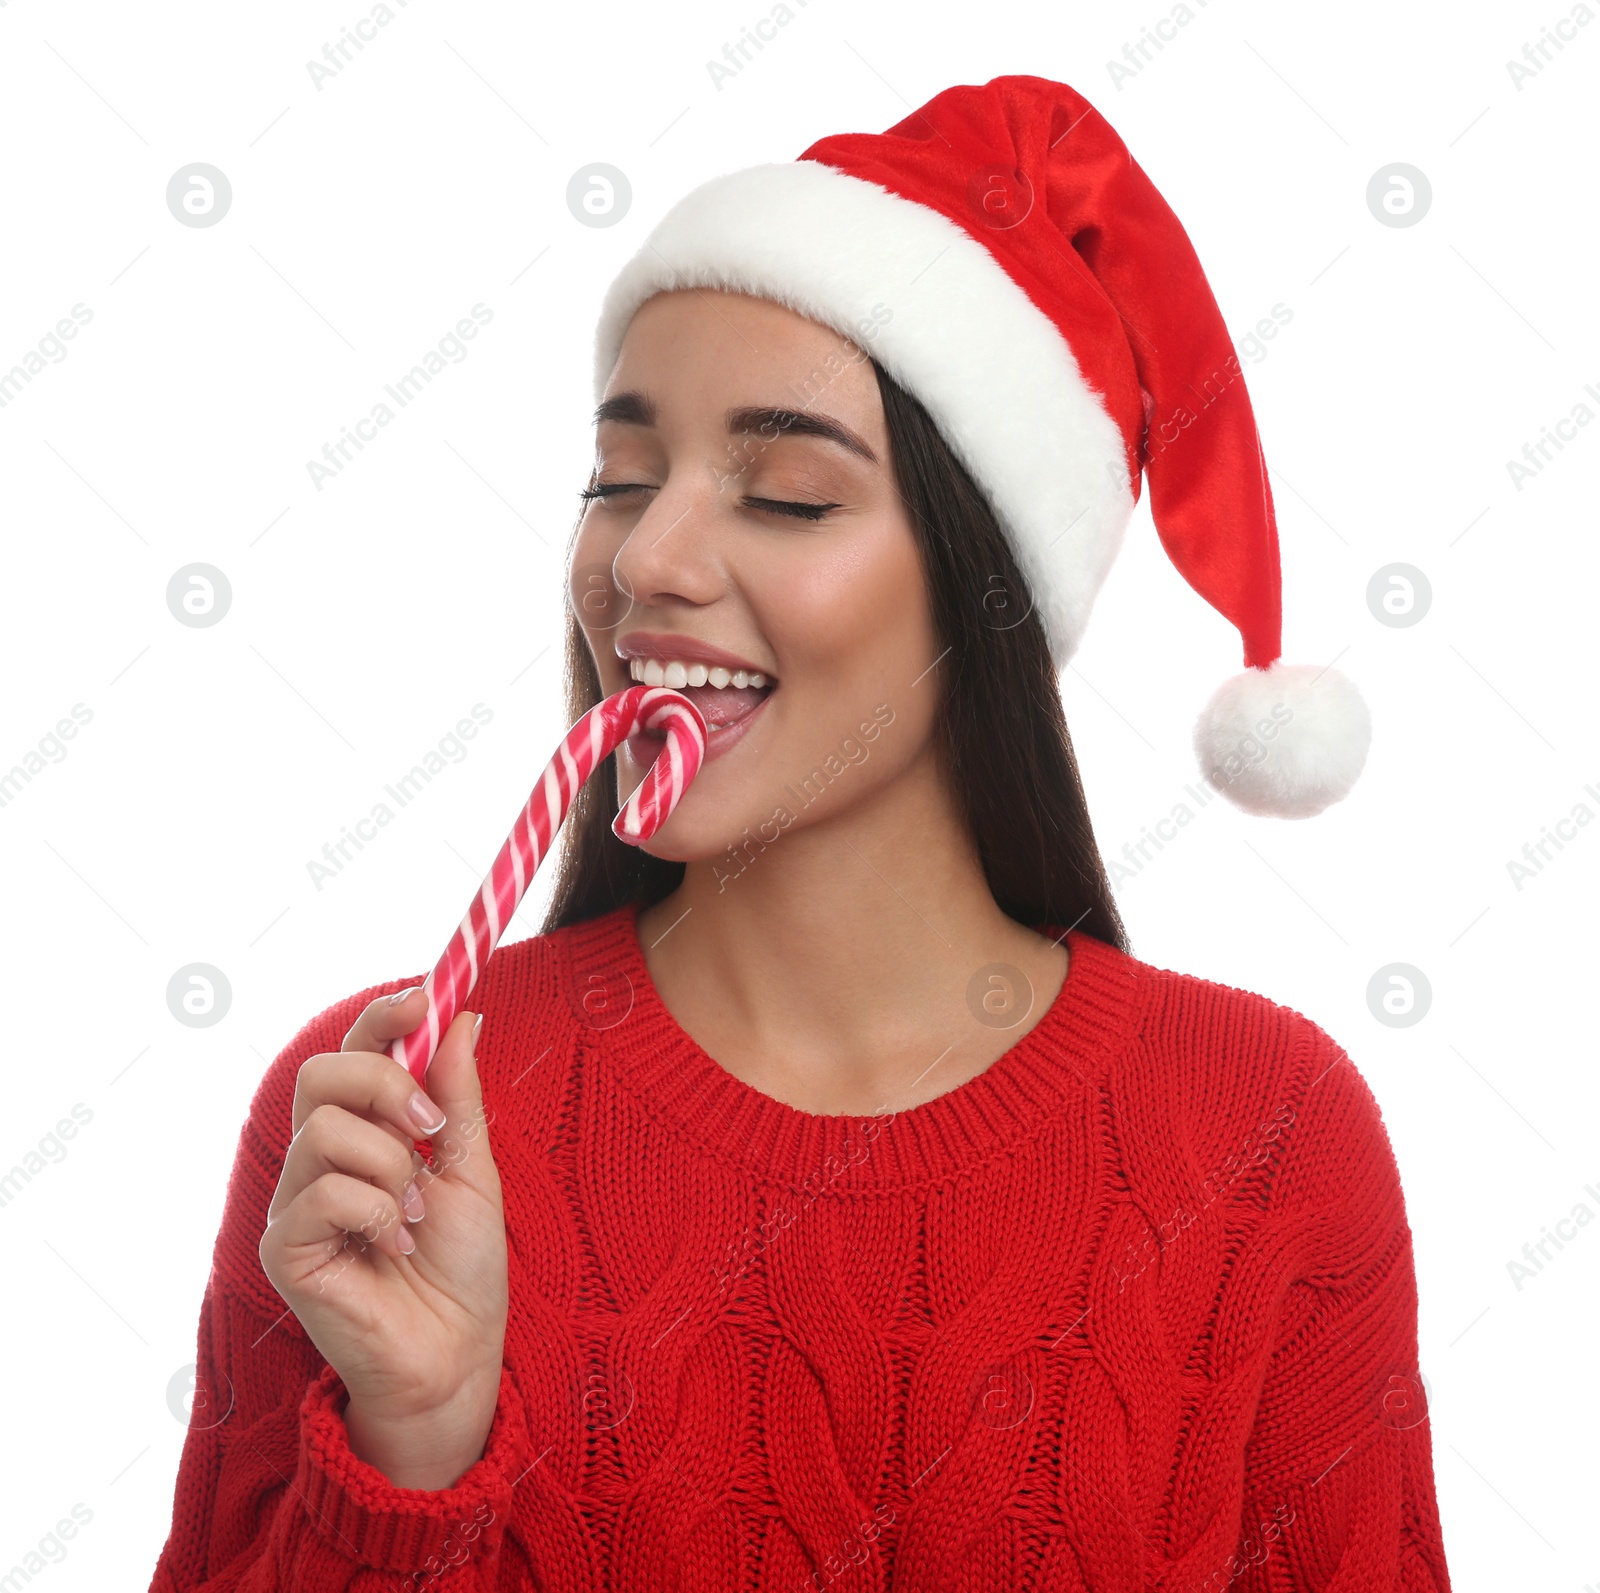 Photo of Young woman in red sweater and Santa hat holding candy cane on white background. Celebrating Christmas